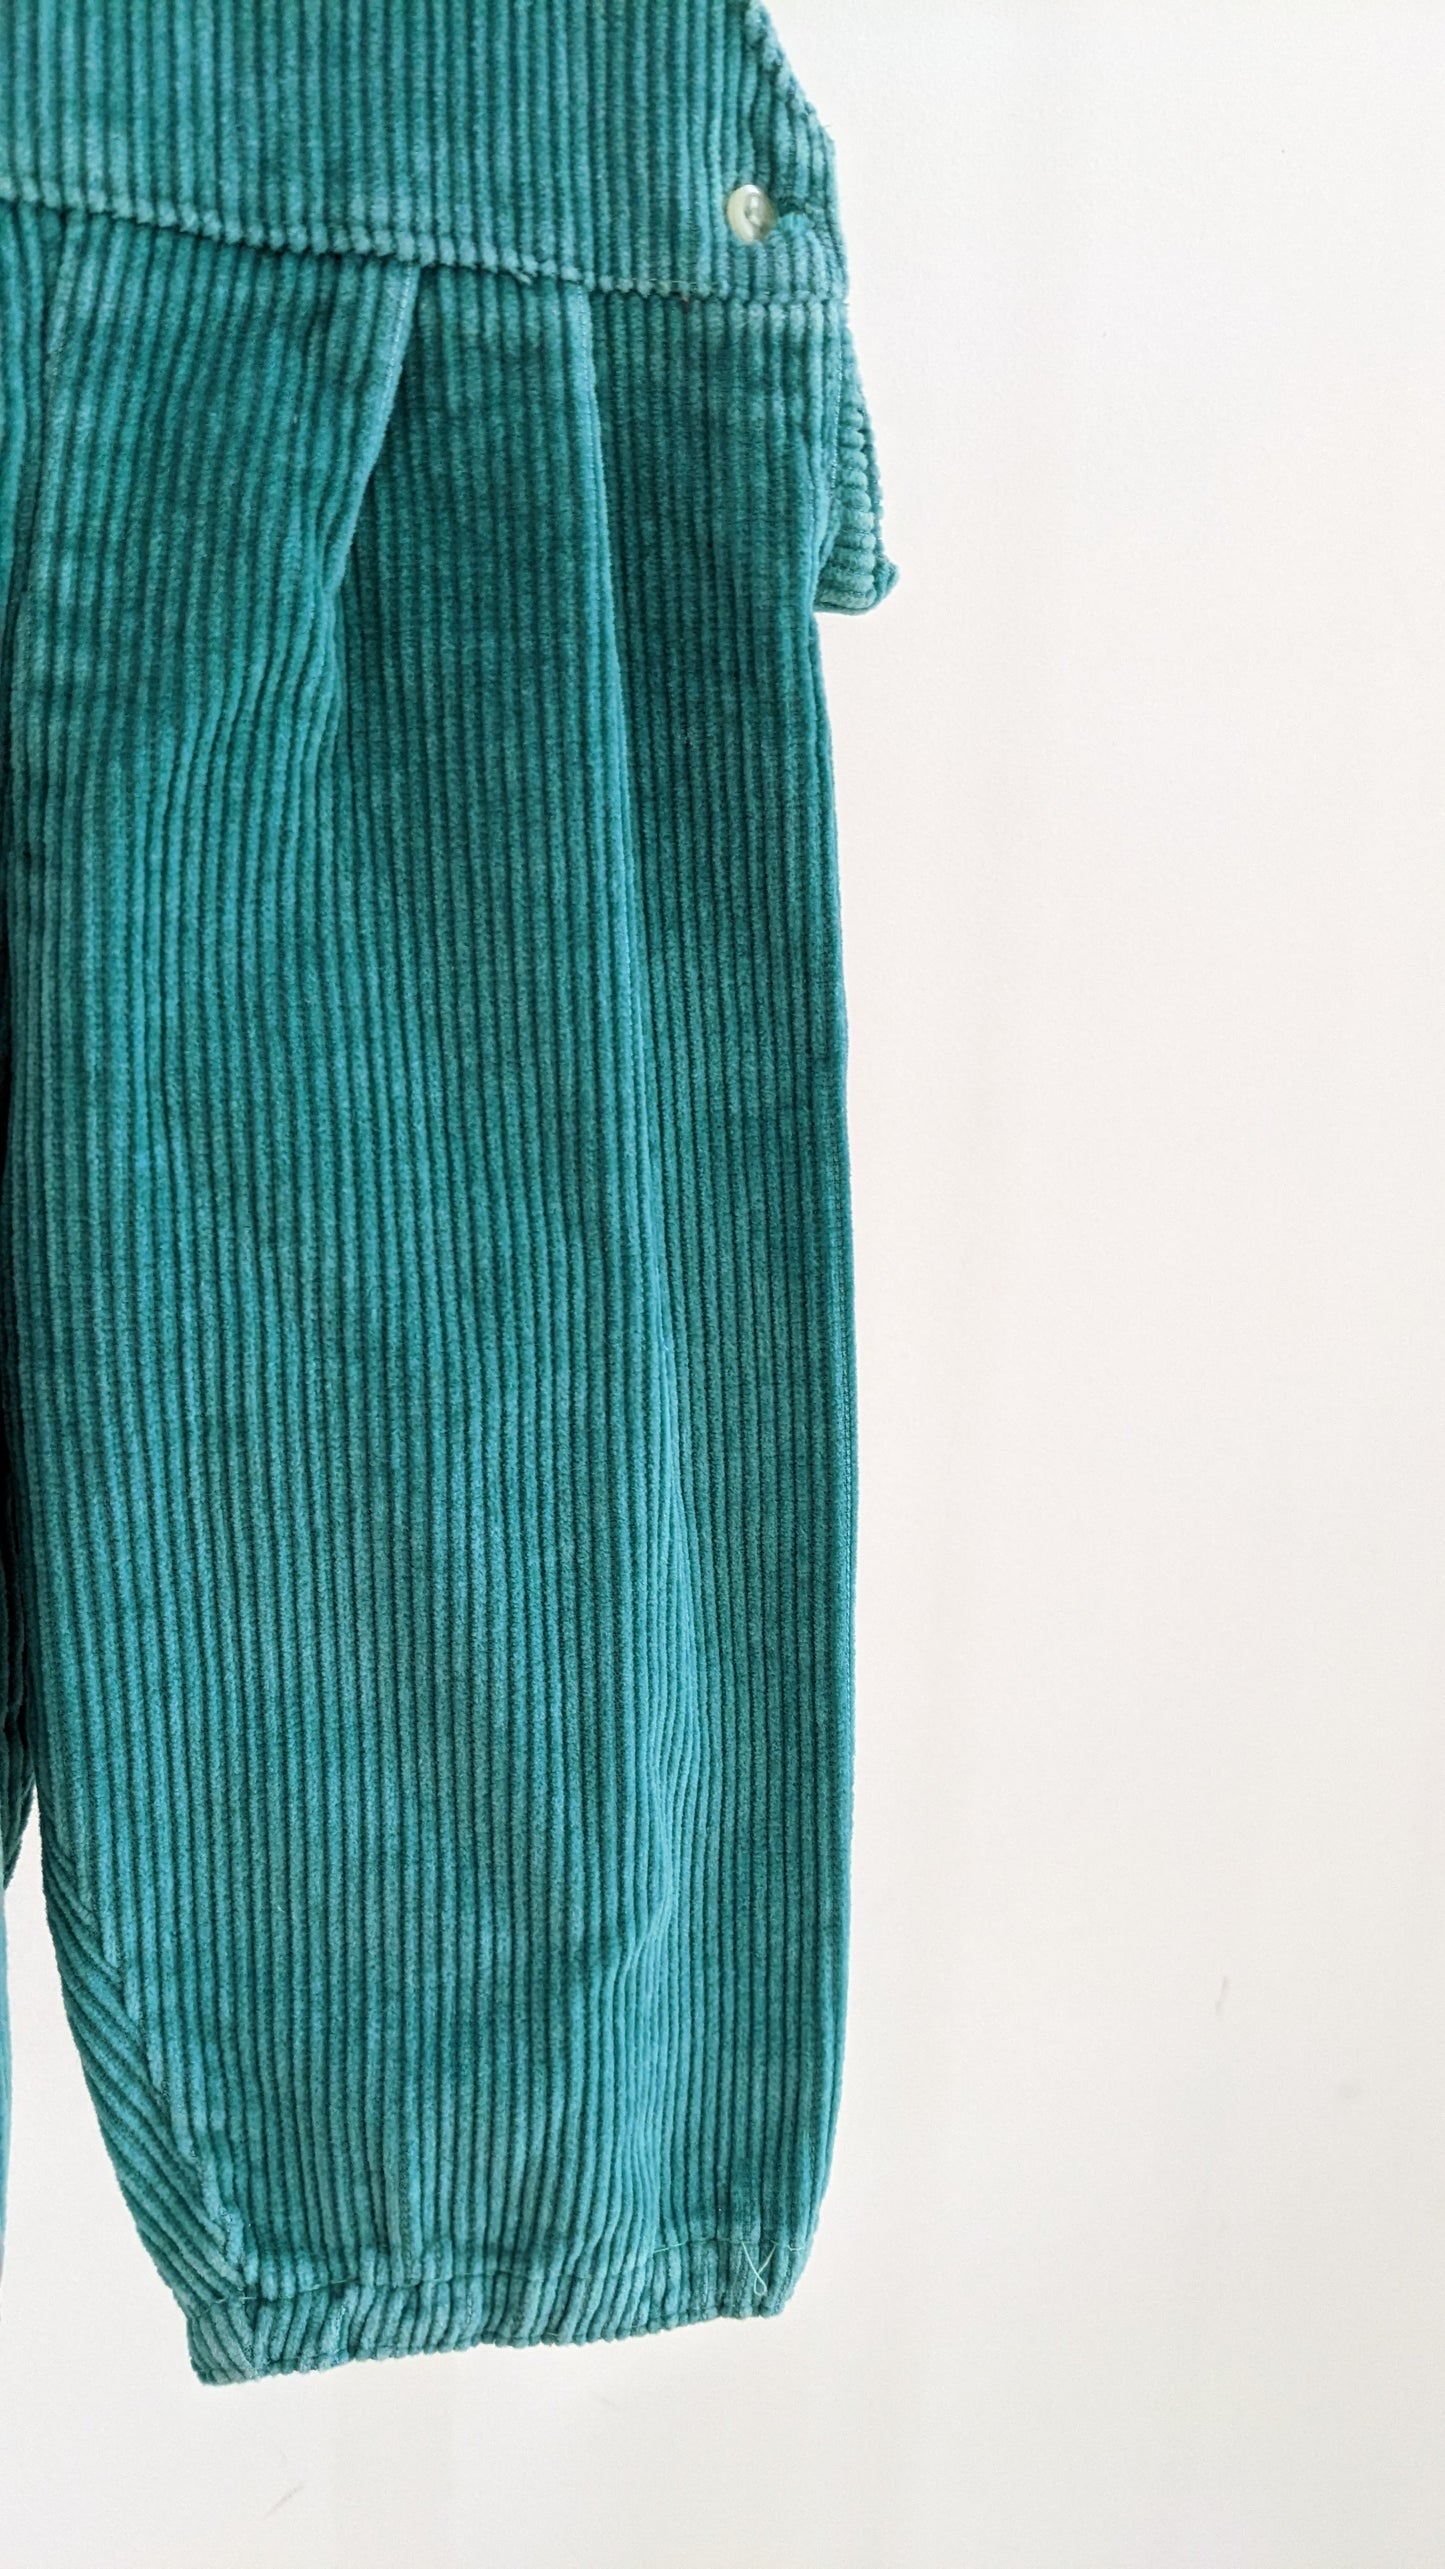 Green corduroy overall with pencil